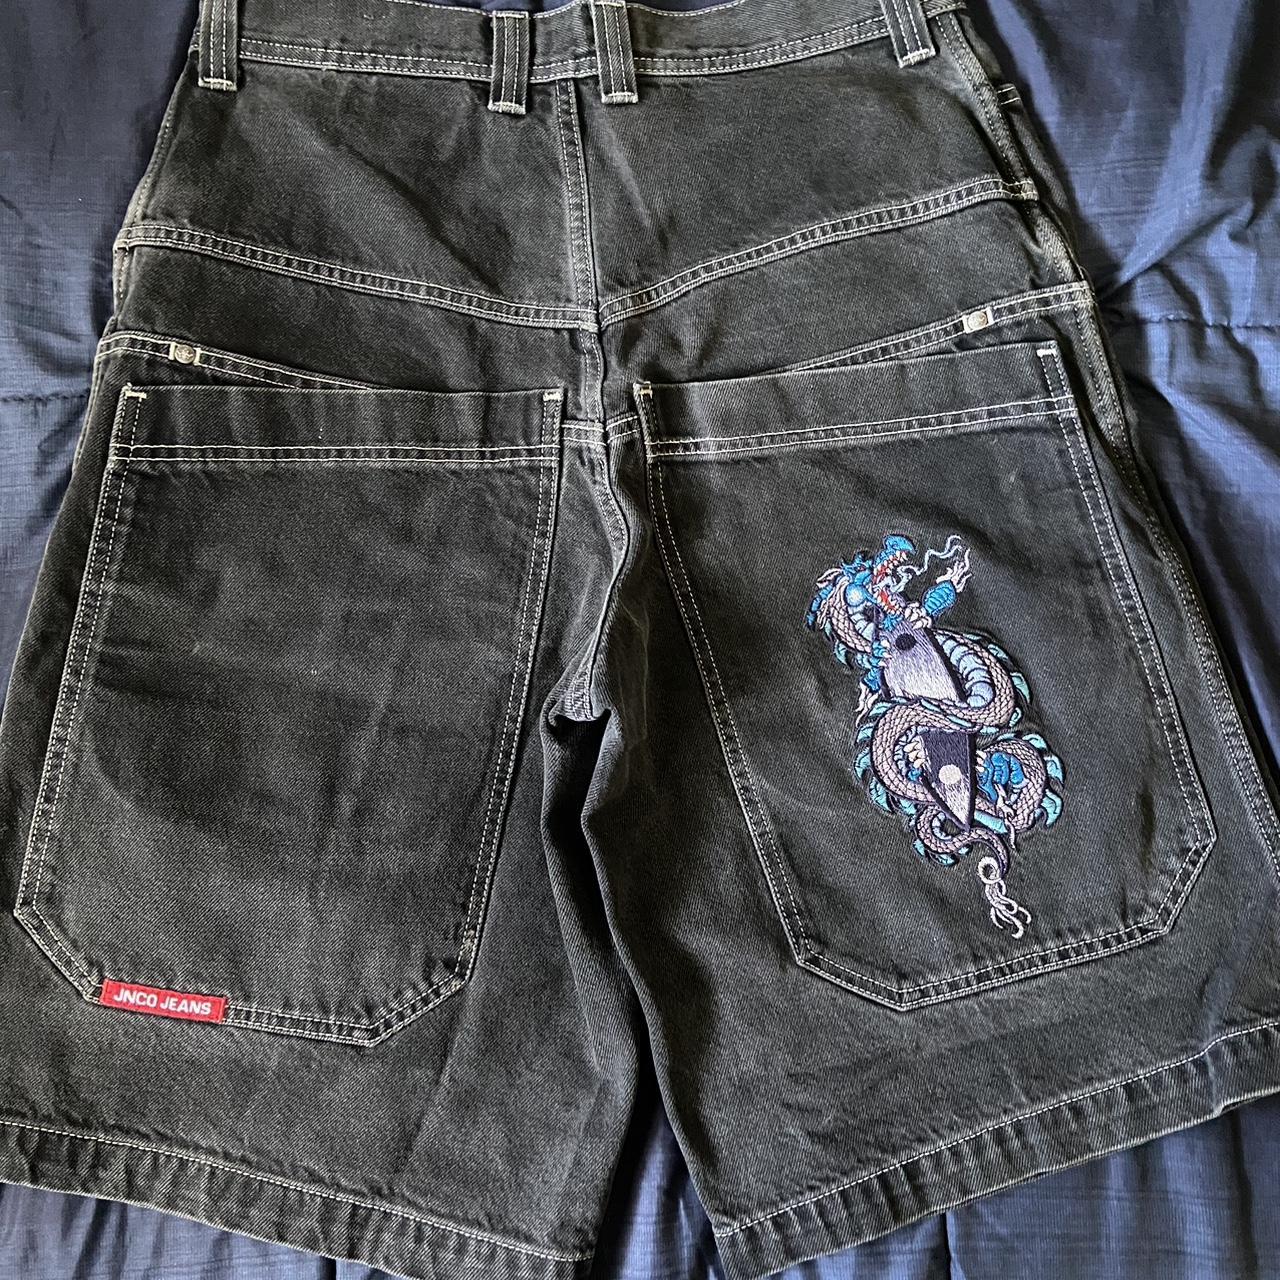 JNCO GRAILED SUPER RARE EMBROIDERY This would be... - Depop